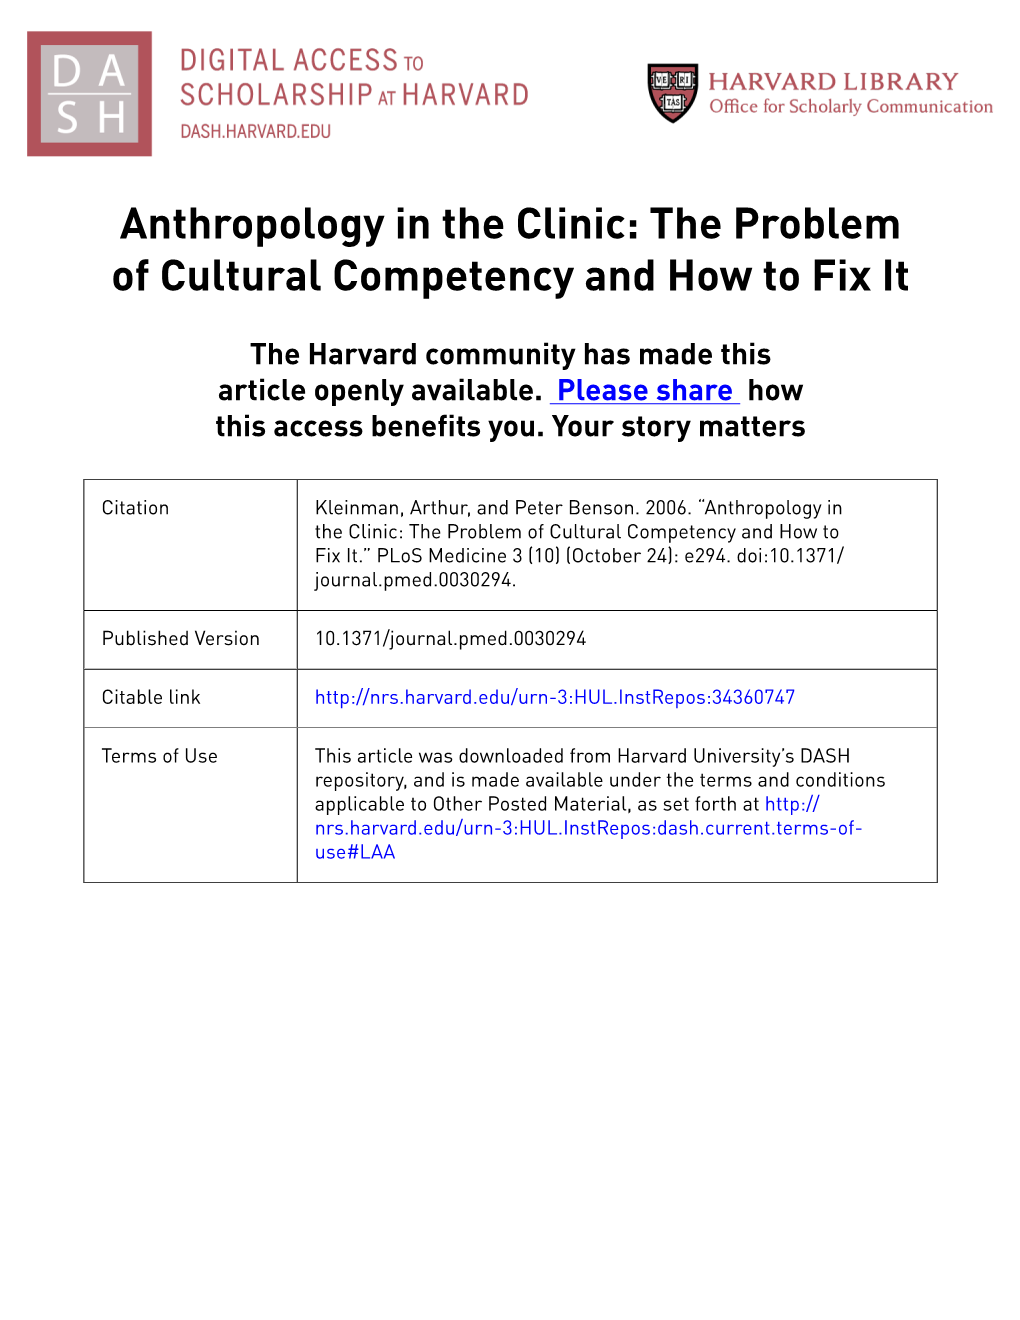 Anthropology in the Clinic: the Problem of Cultural Competency and How to Fix It